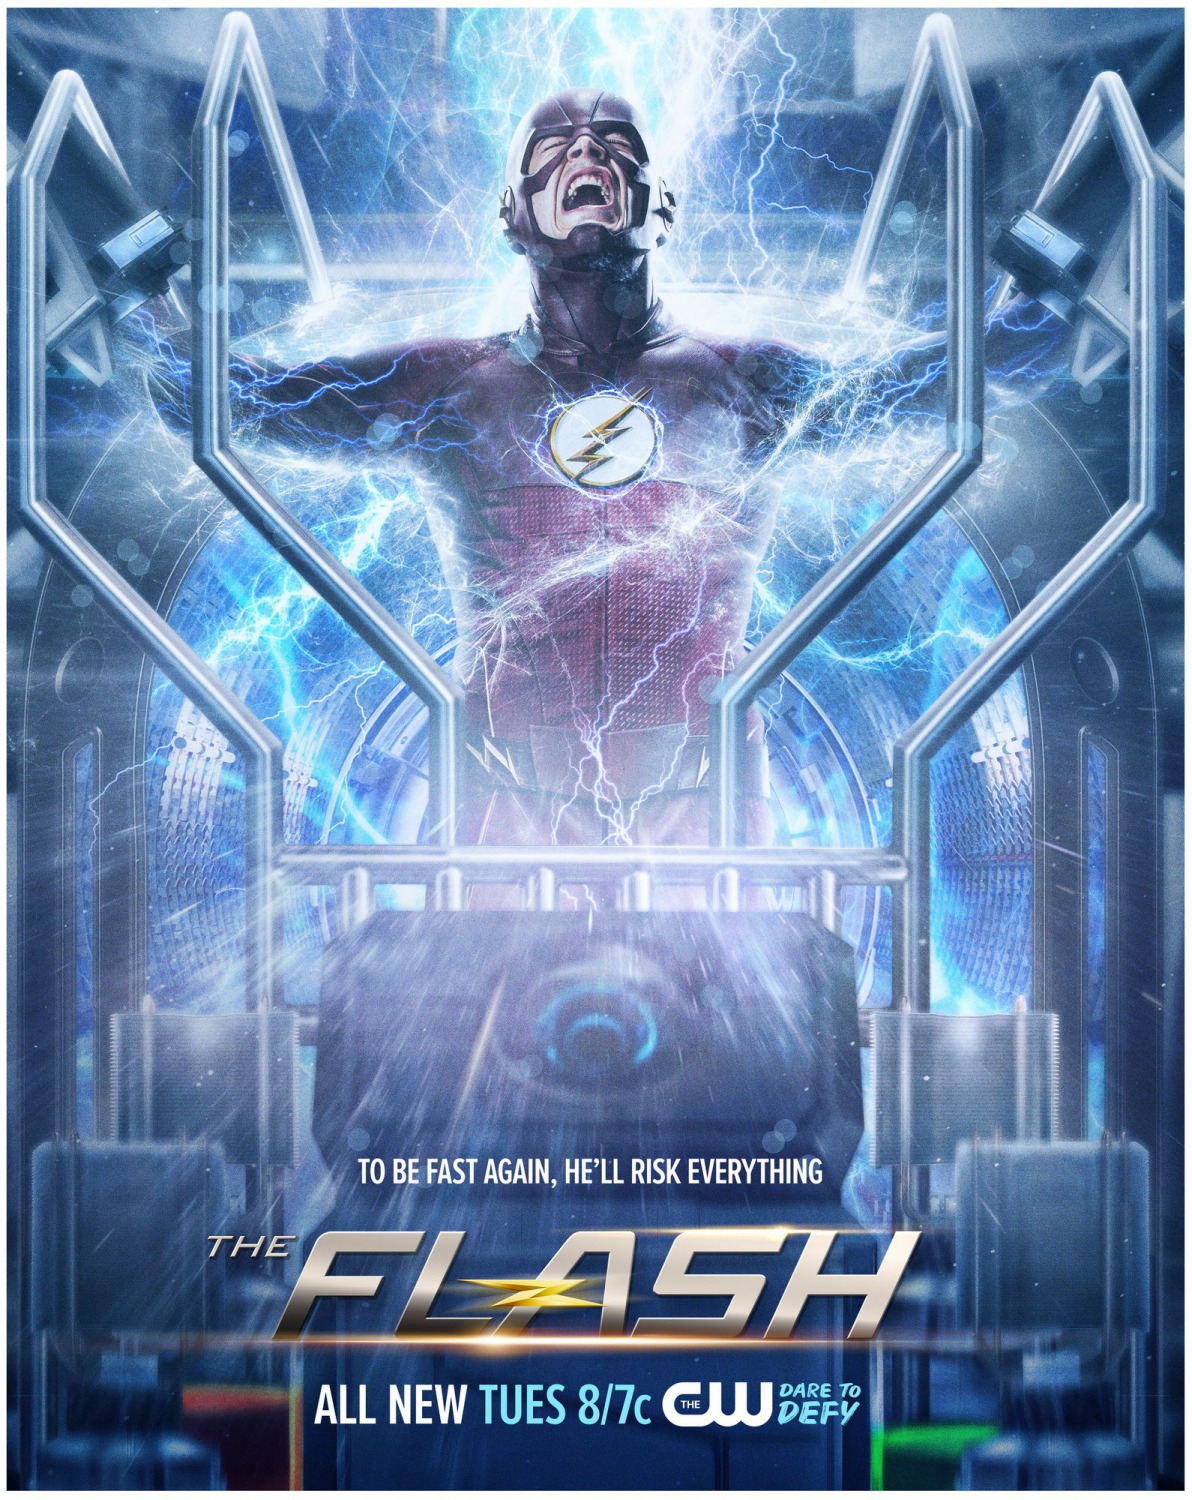 Extra Large TV Poster Image for The Flash (#13 of 65)